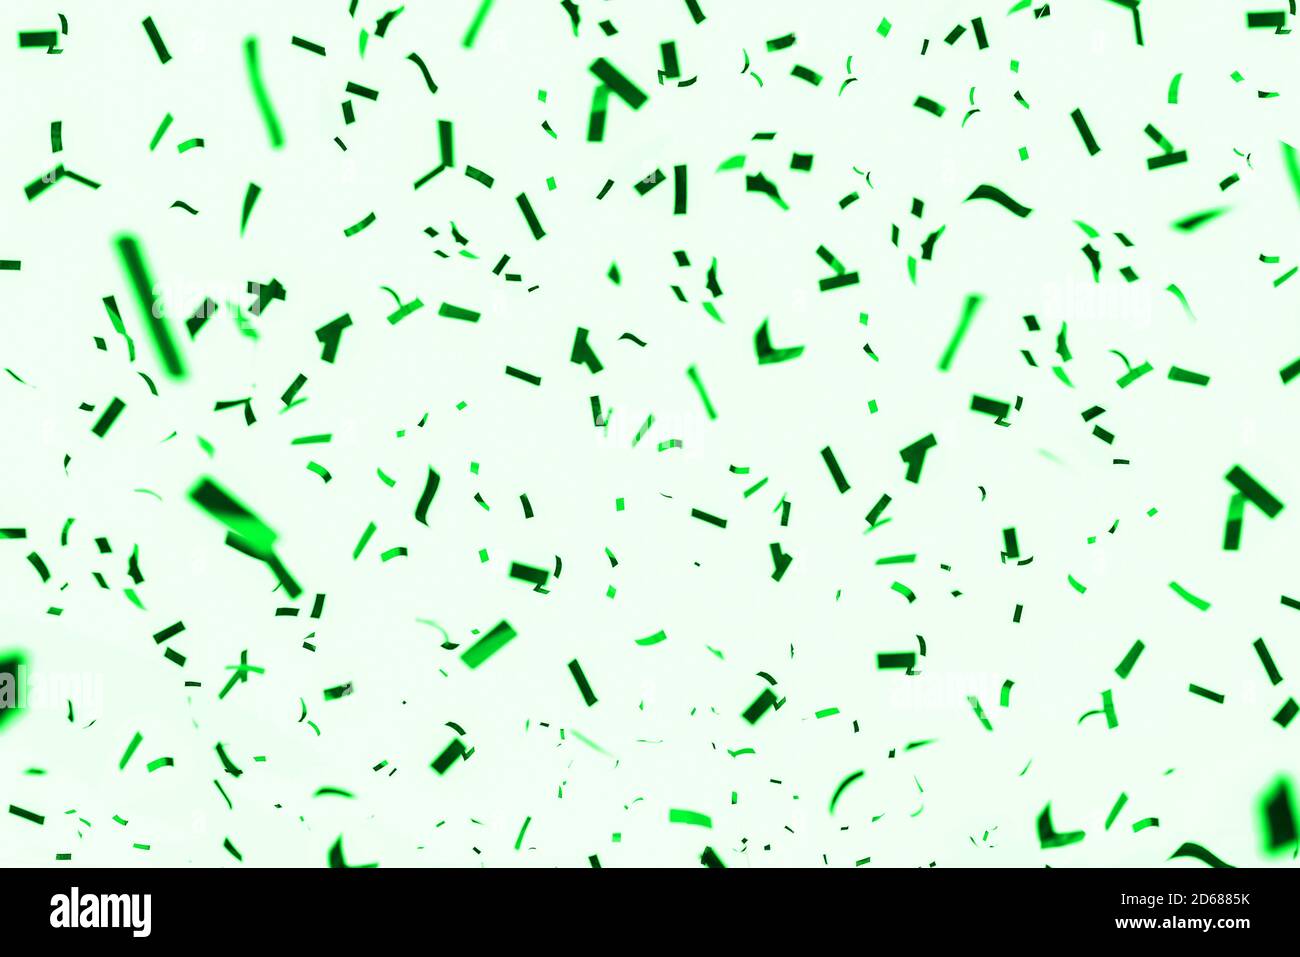 Festive background of green confetti. Template for birthday, carnival, anniversary, festival and other bright events. Party invitation Stock Photo